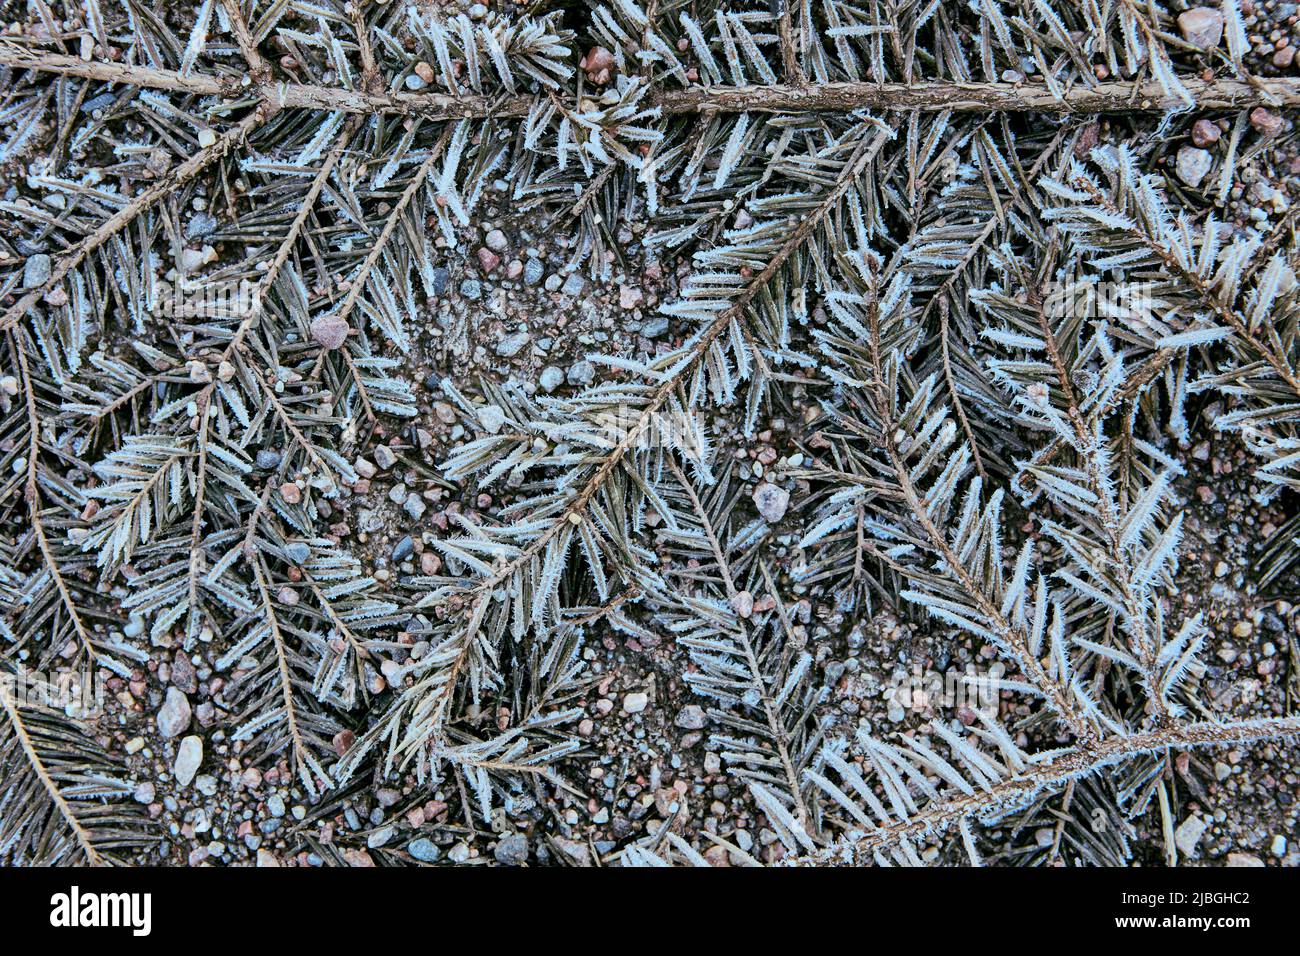 Texture of dead plants, fir branches on side of rural road. Stock Photo